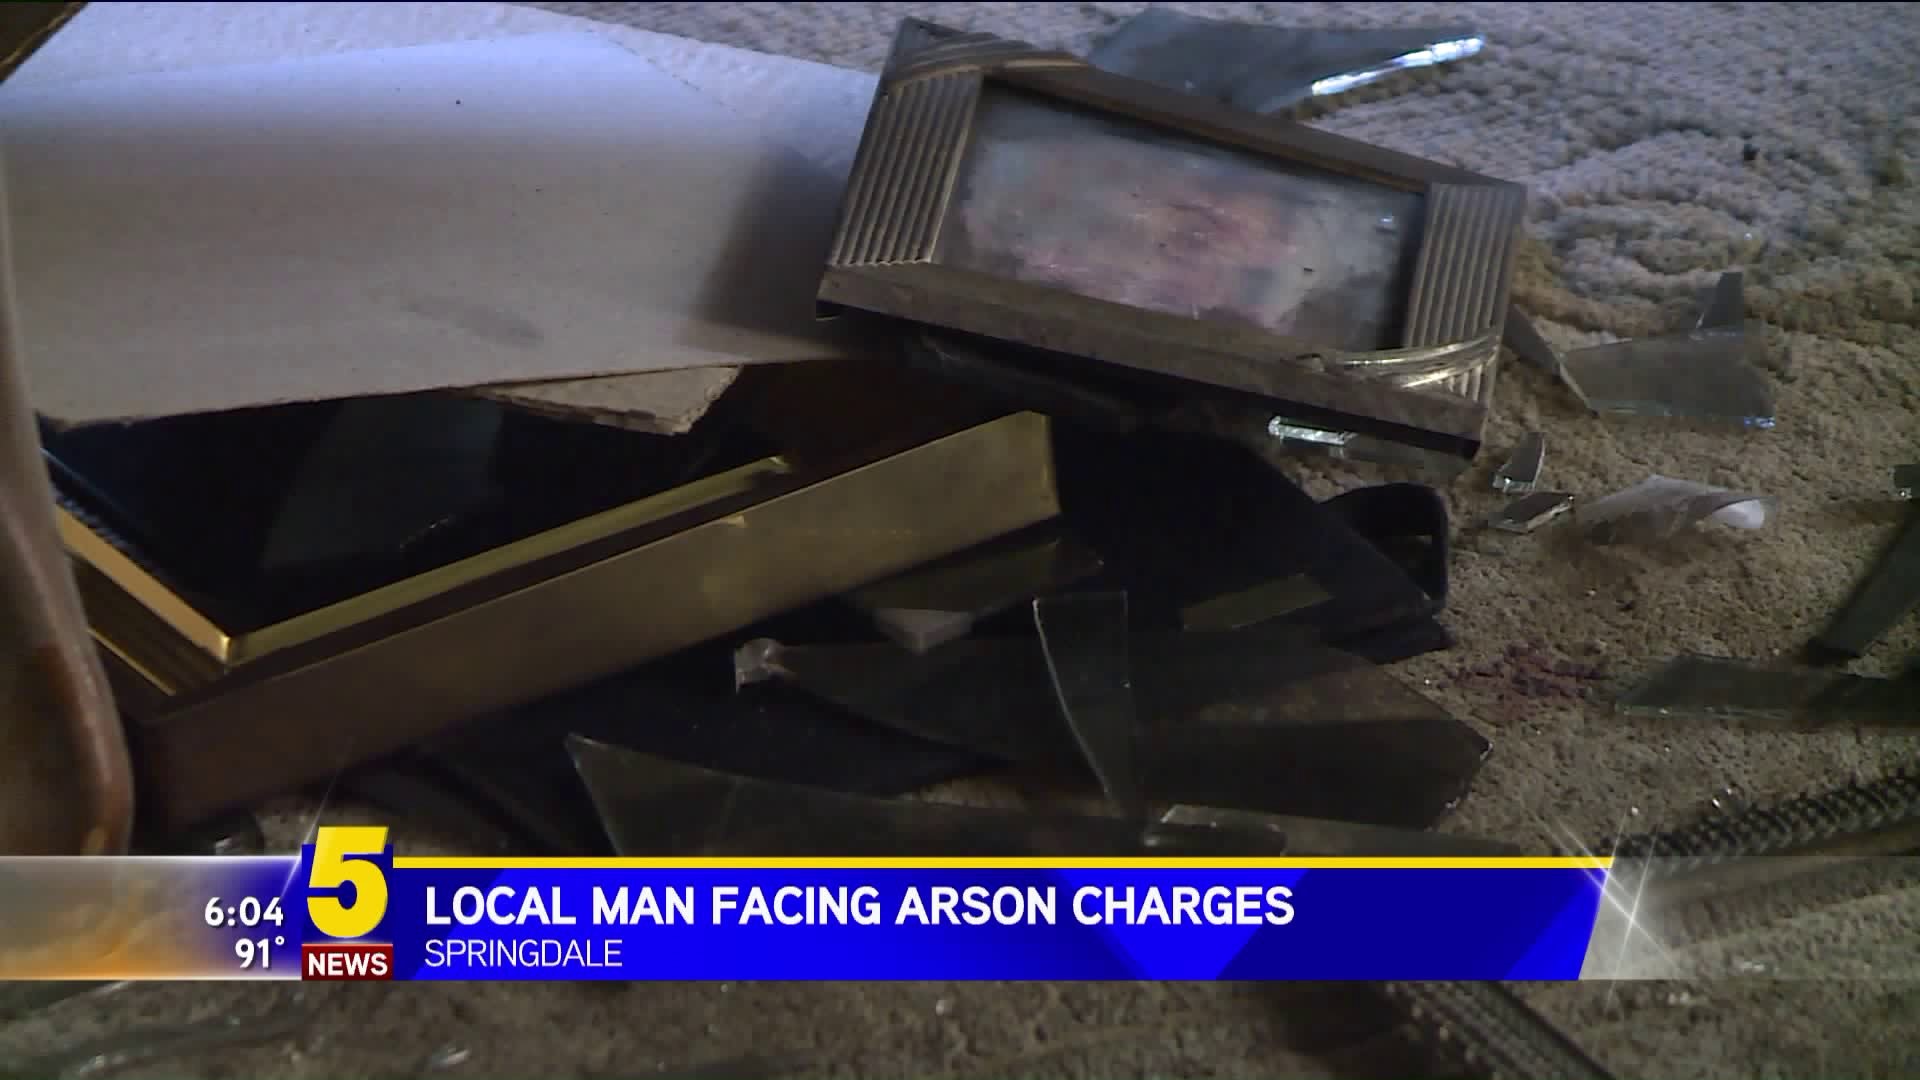 Local Man Facing Arson Charges